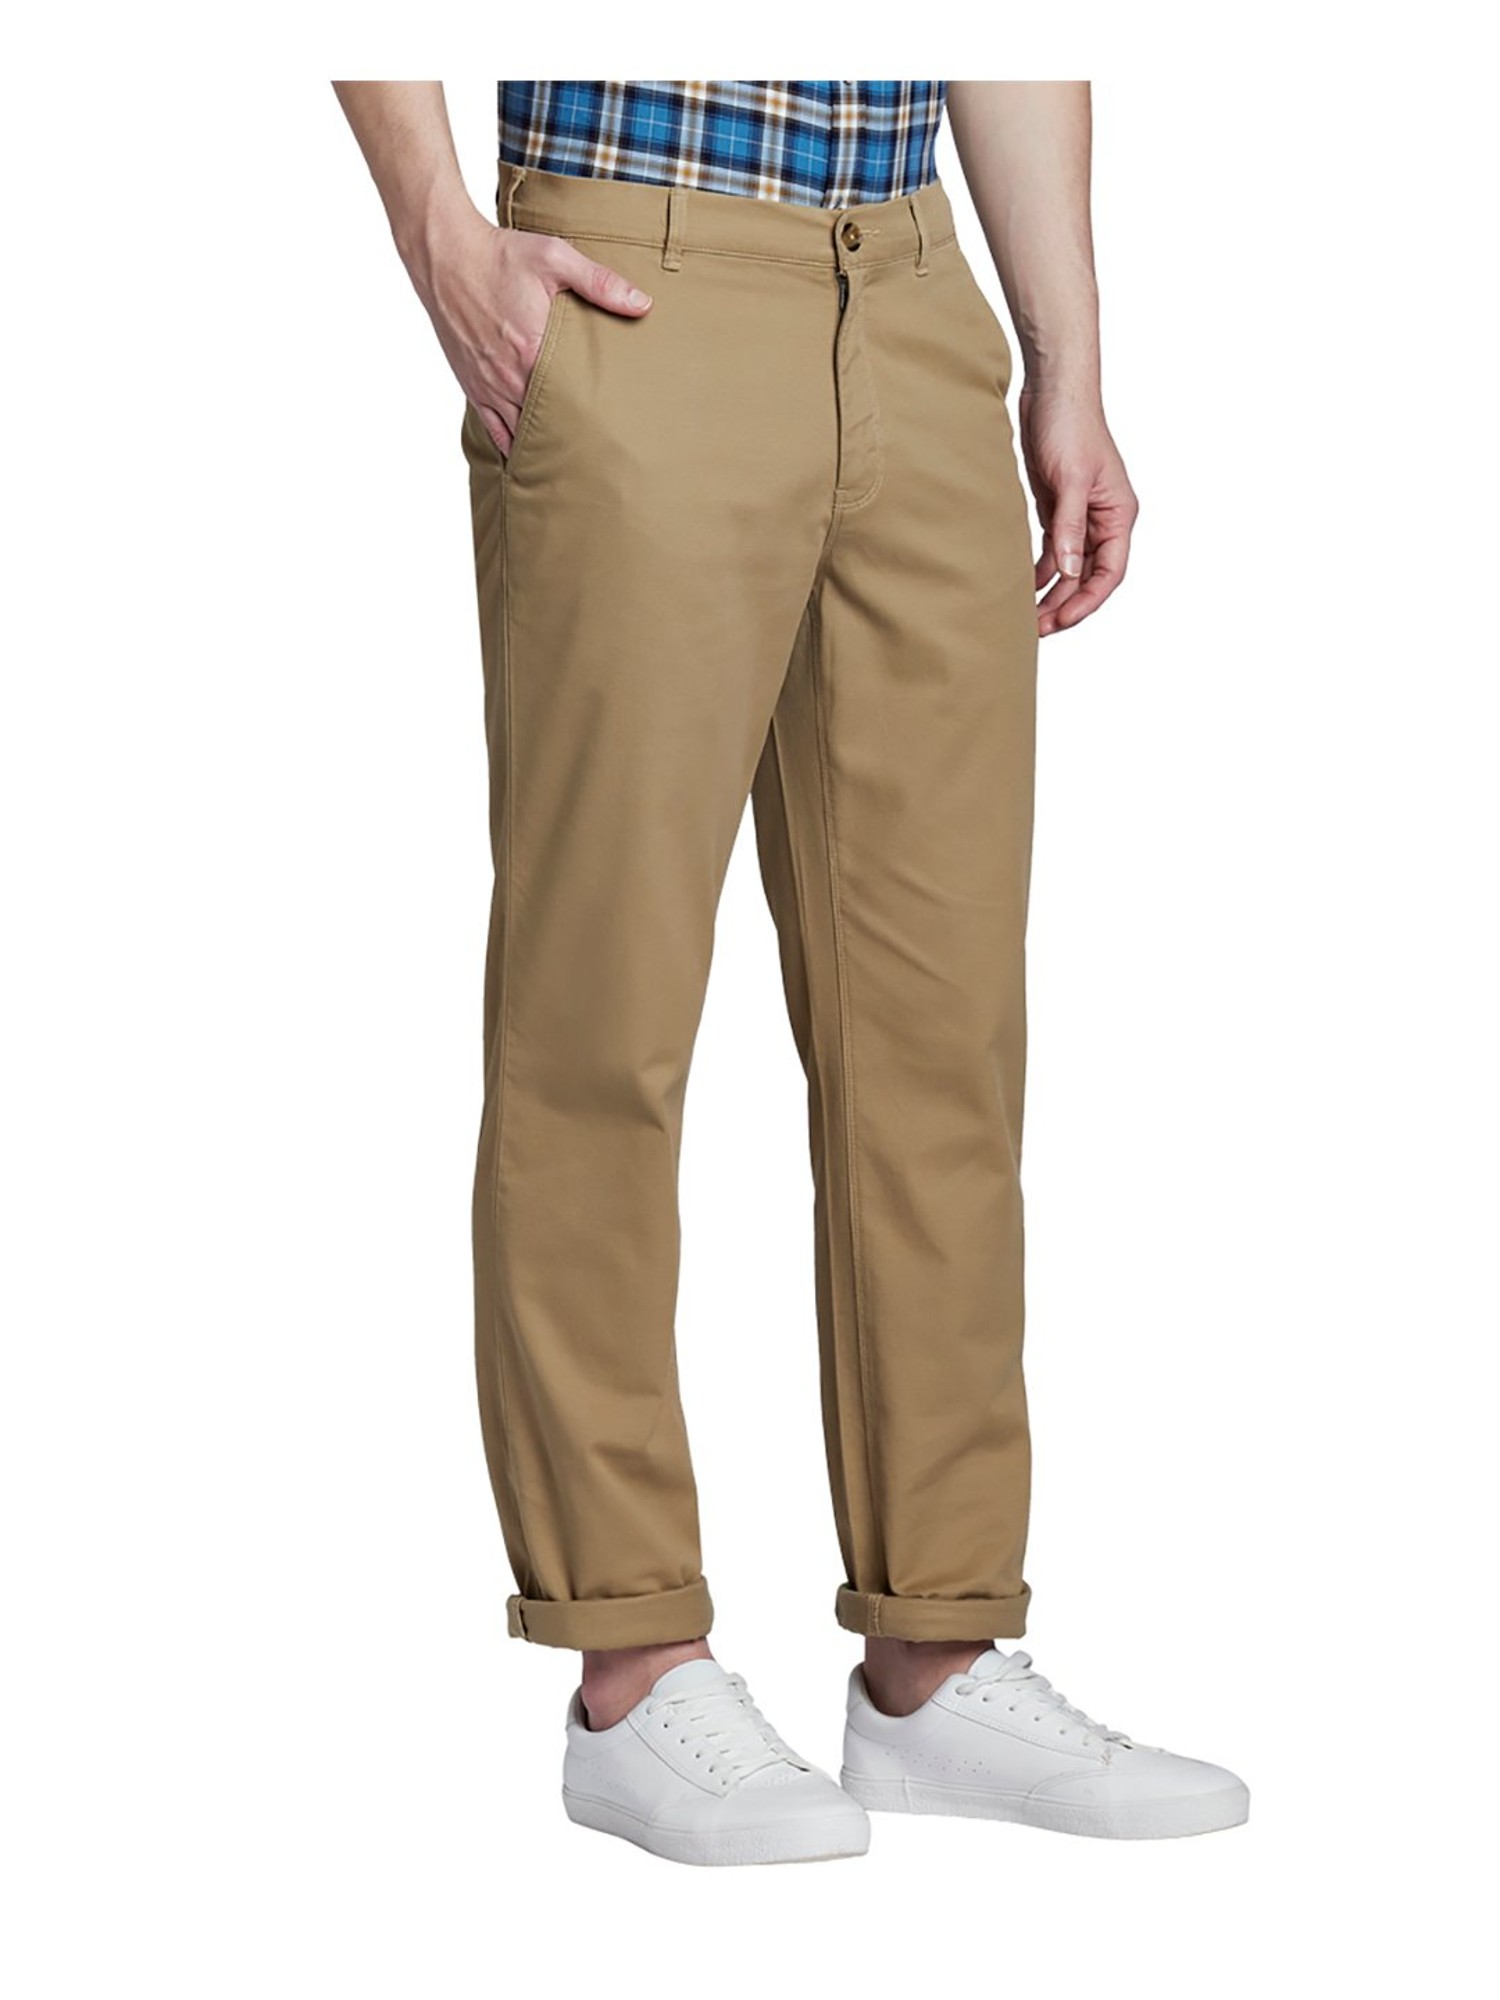  Other Stories linen trousers with belt in beige  ASOS